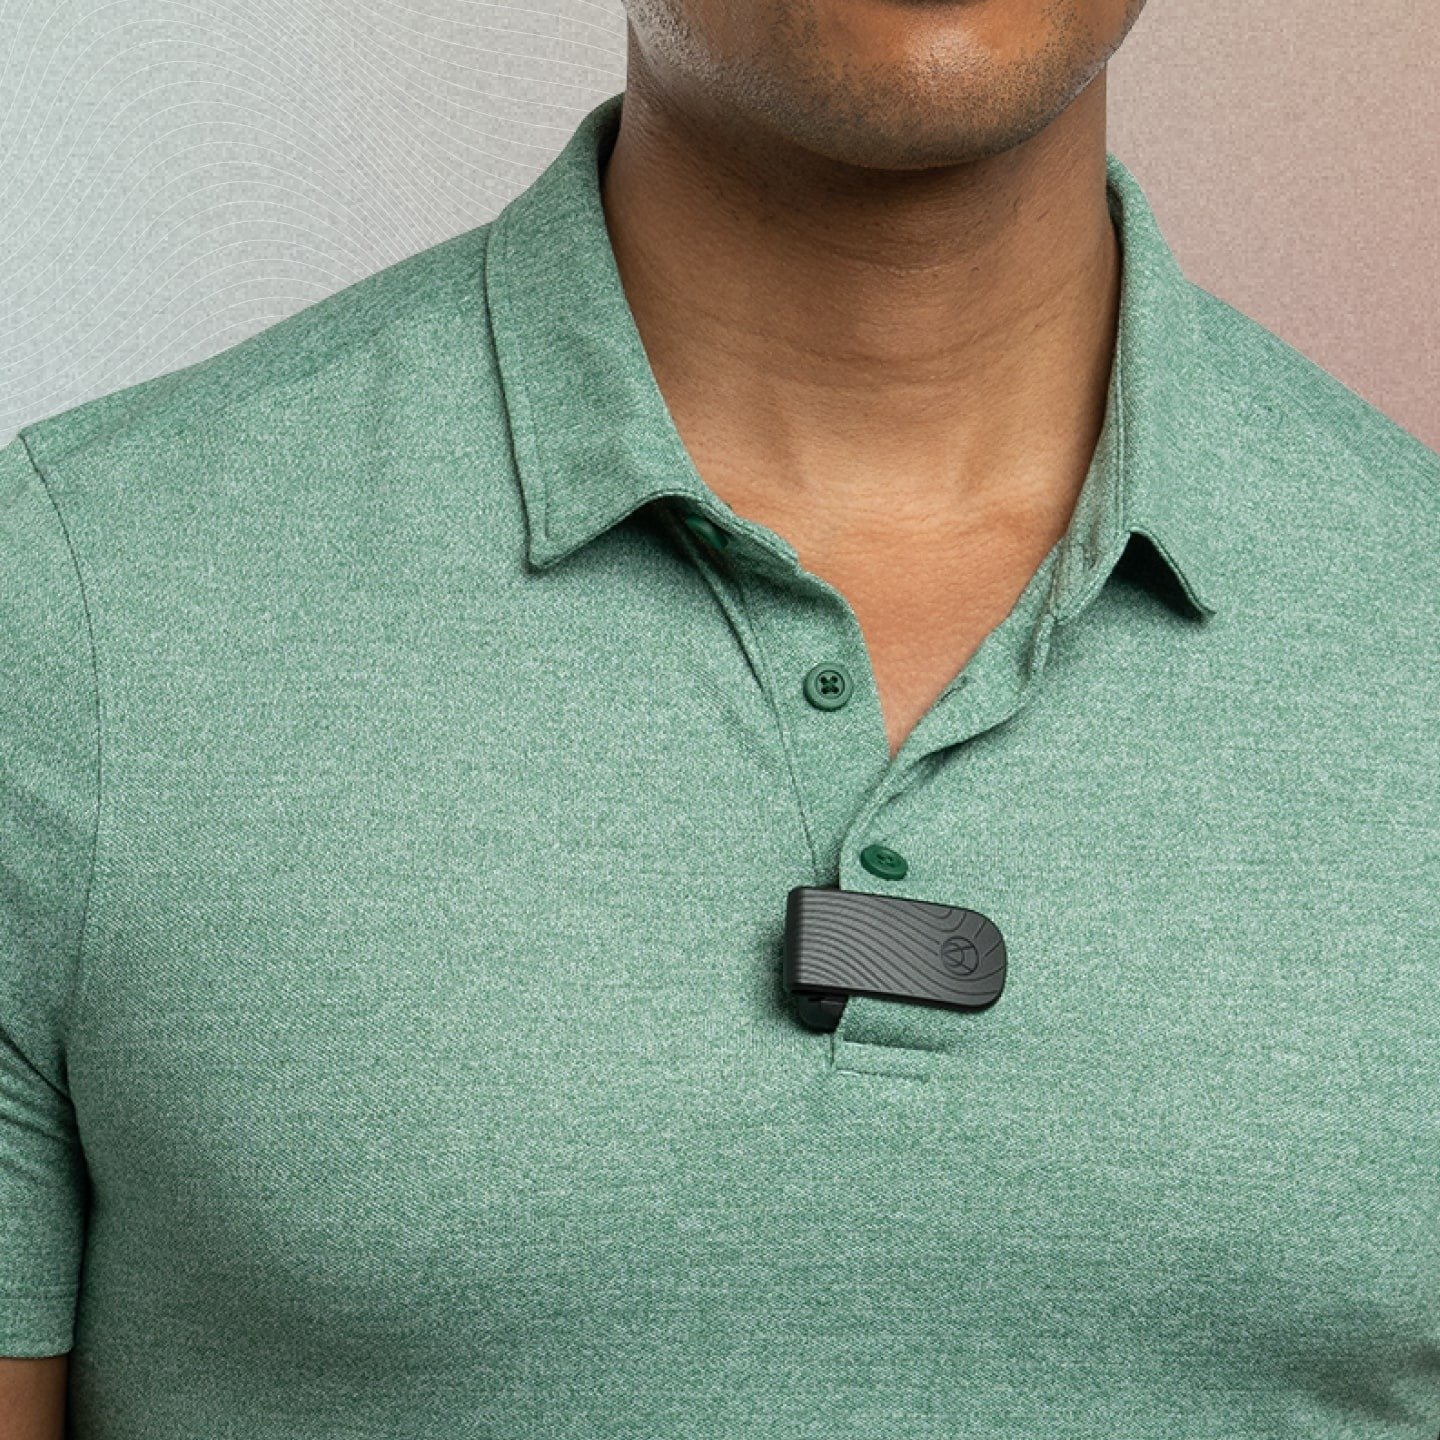 Male wearing Apollo Clip on shirt